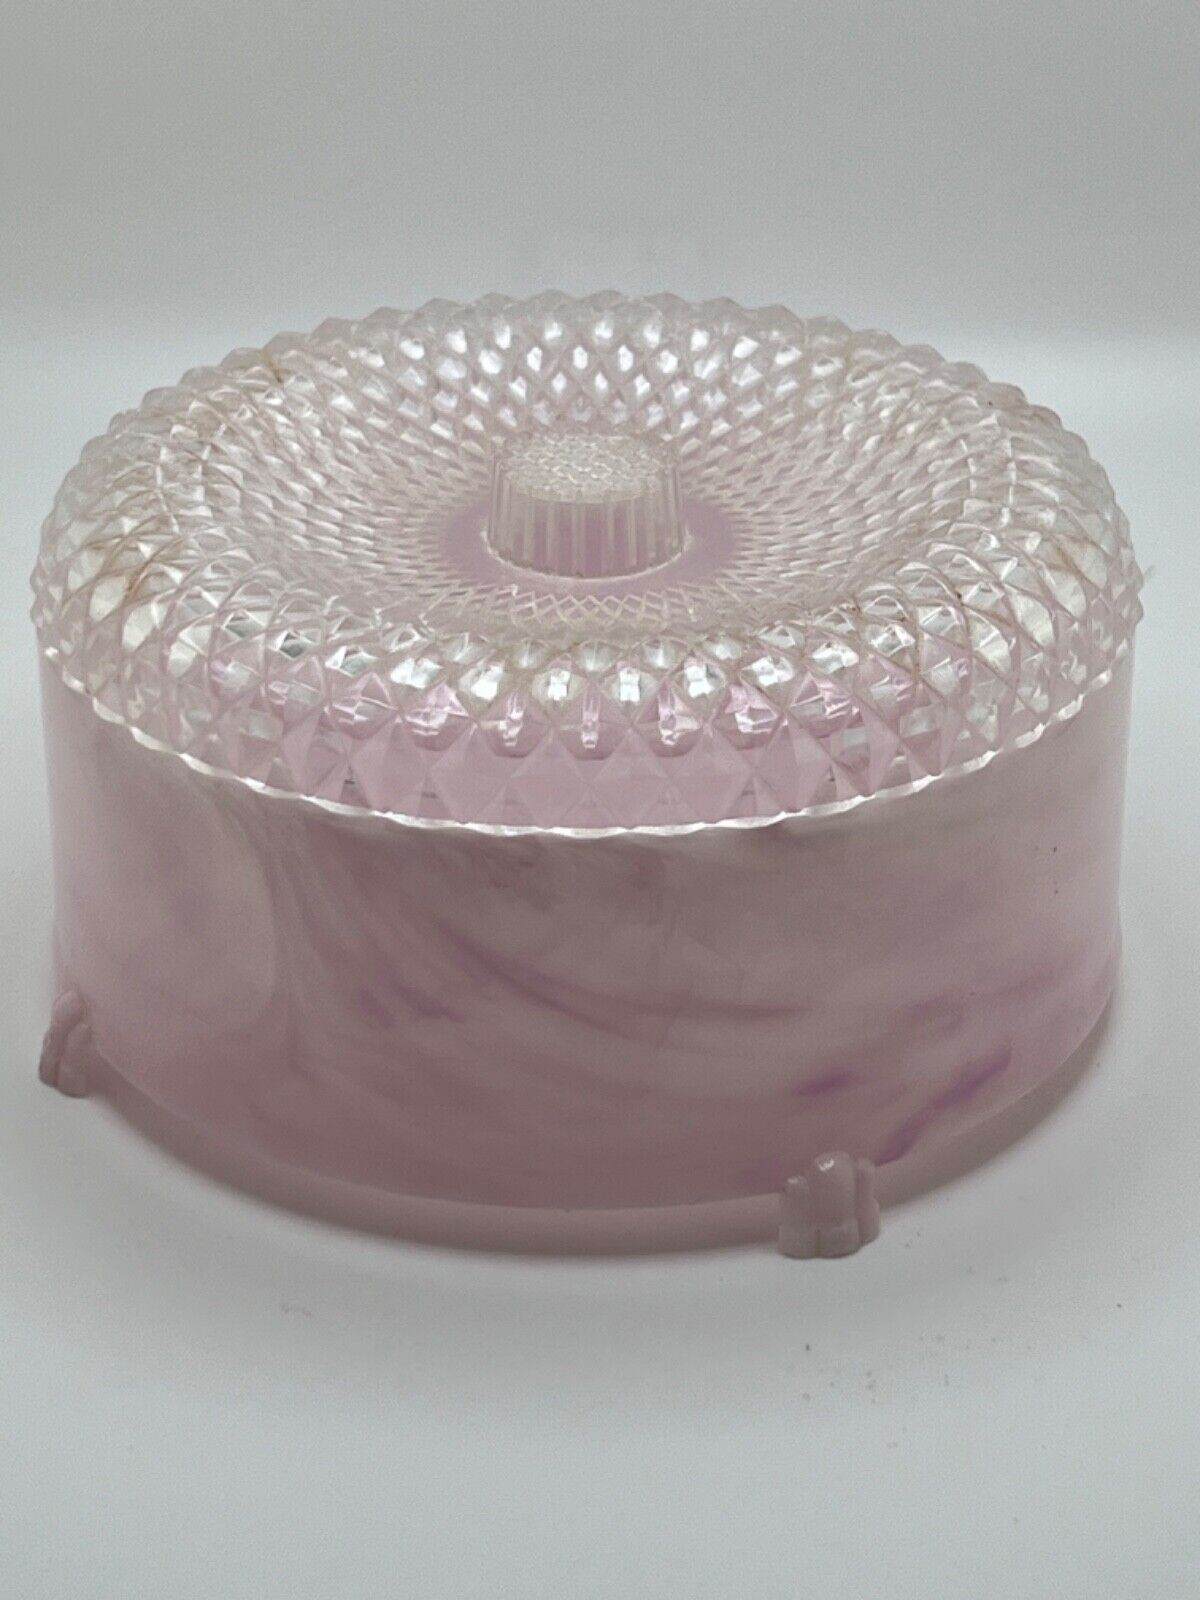 Vintage Persian Lilac Deluxe Dusting Powder Pink Container, Holder, Jar & Lid